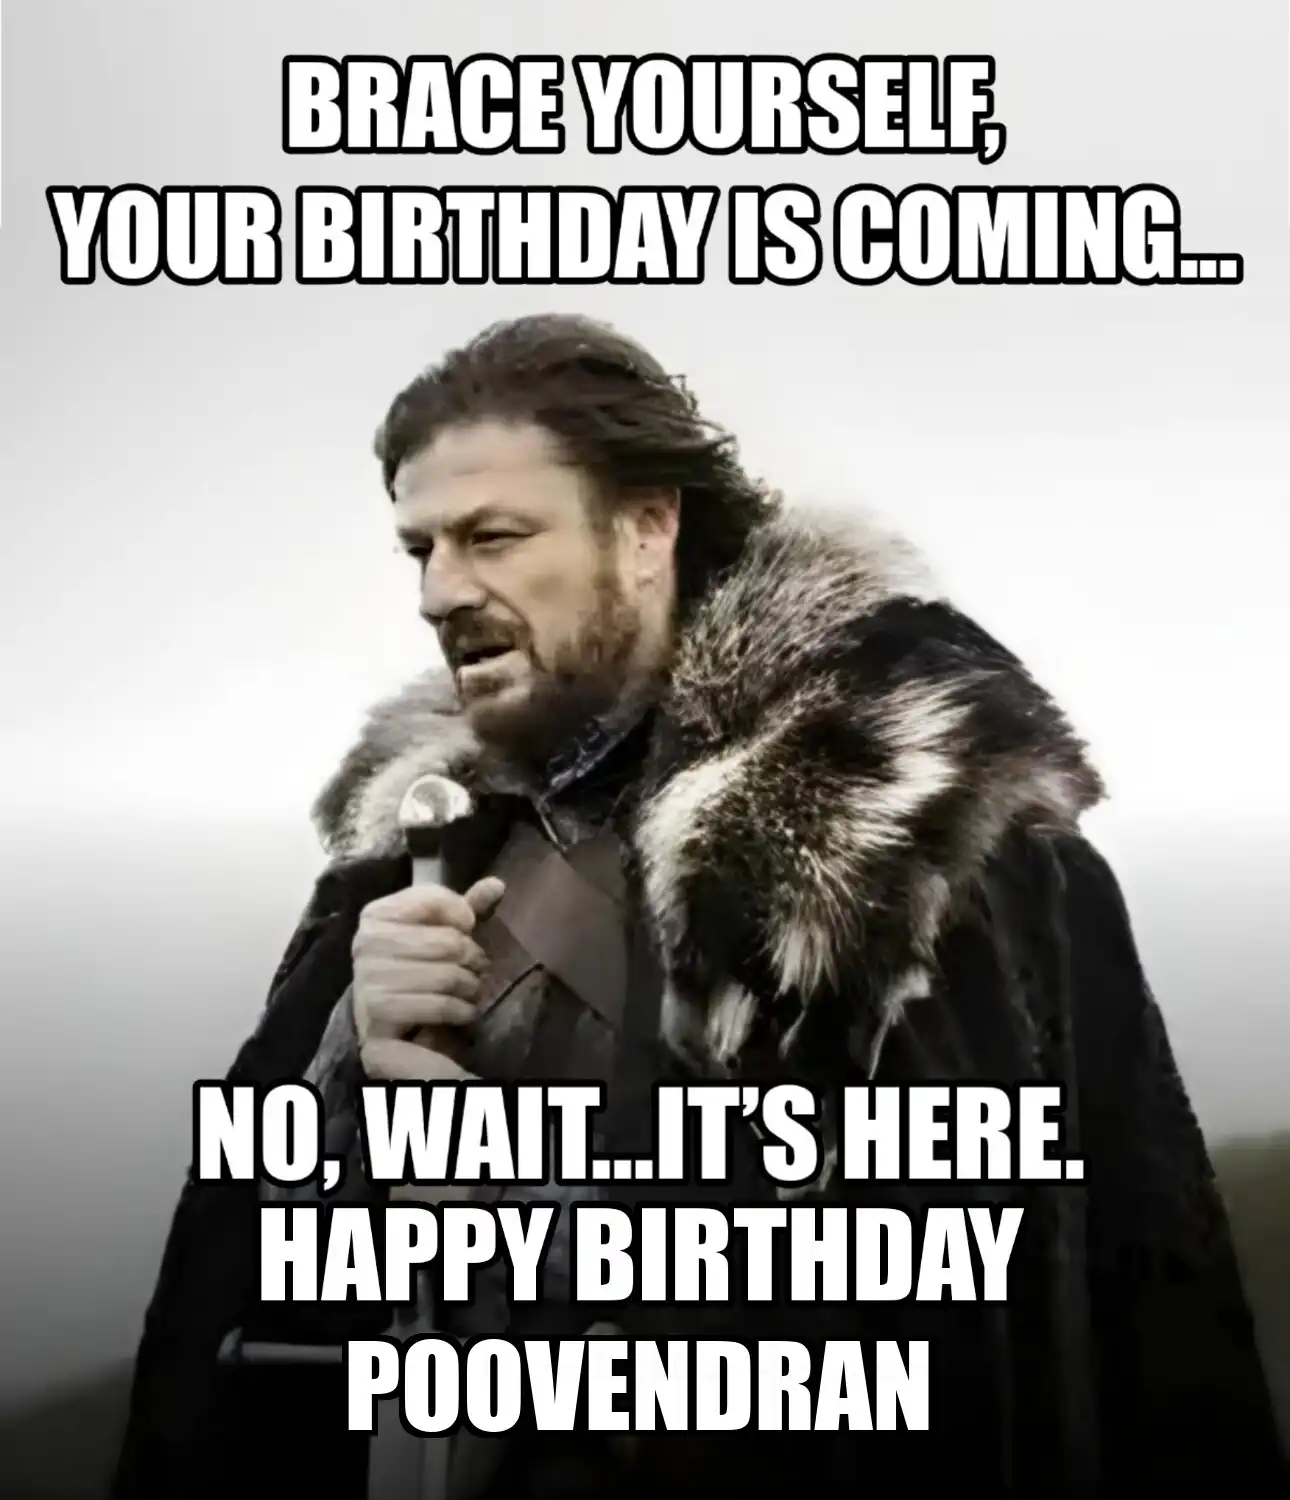 Happy Birthday Poovendran Brace Yourself Your Birthday Is Coming Meme